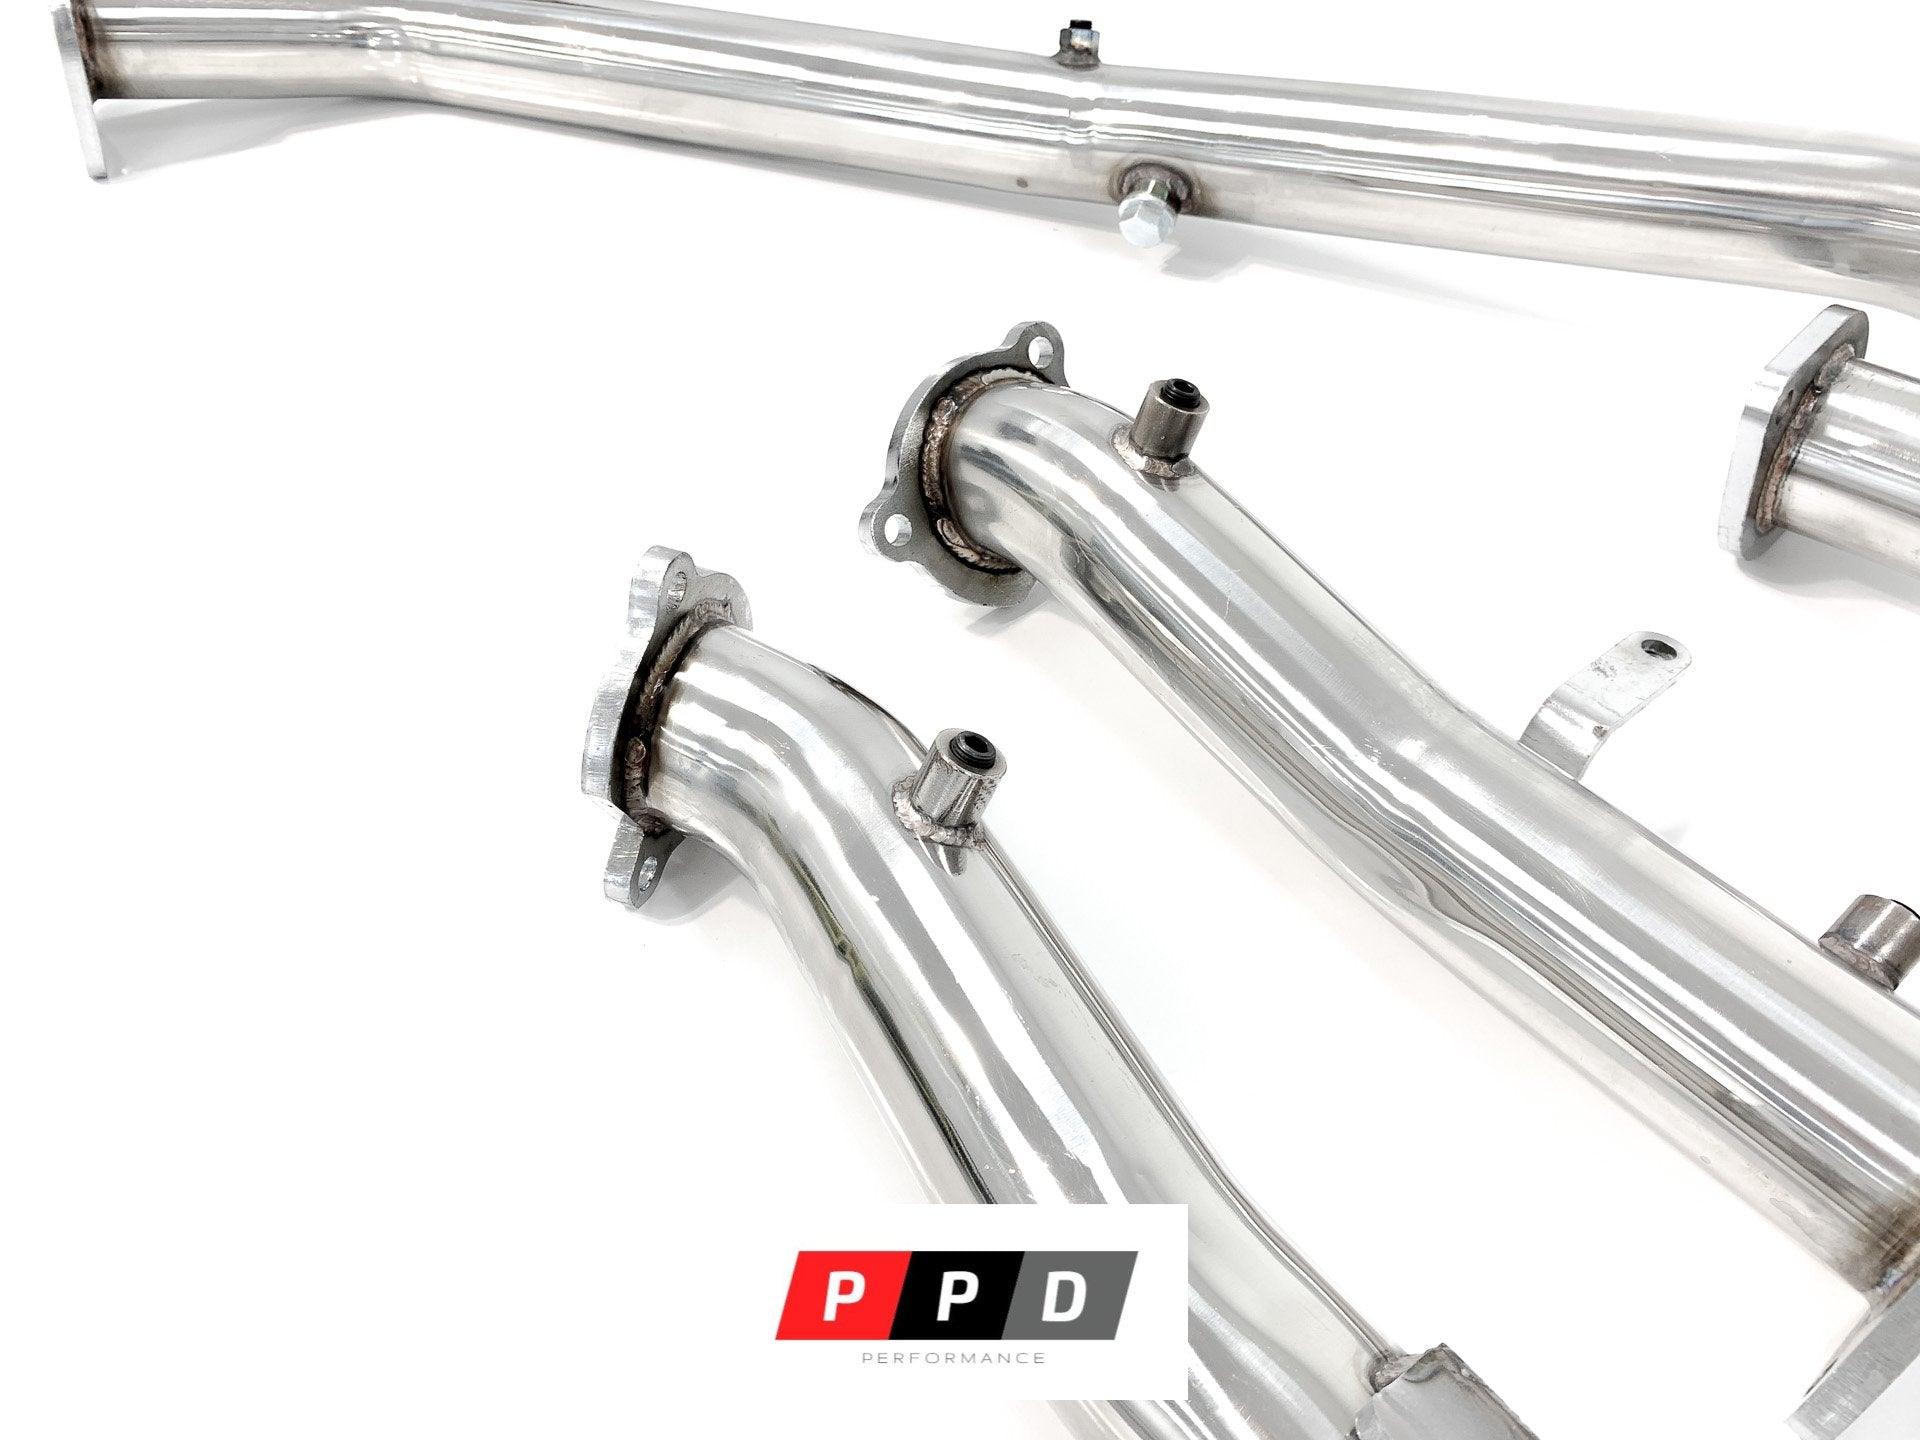 PPD Performance - Toyota Landcruiser 200 Series (2015+) Stainless DPF-Delete Pipes - 4X4OC™